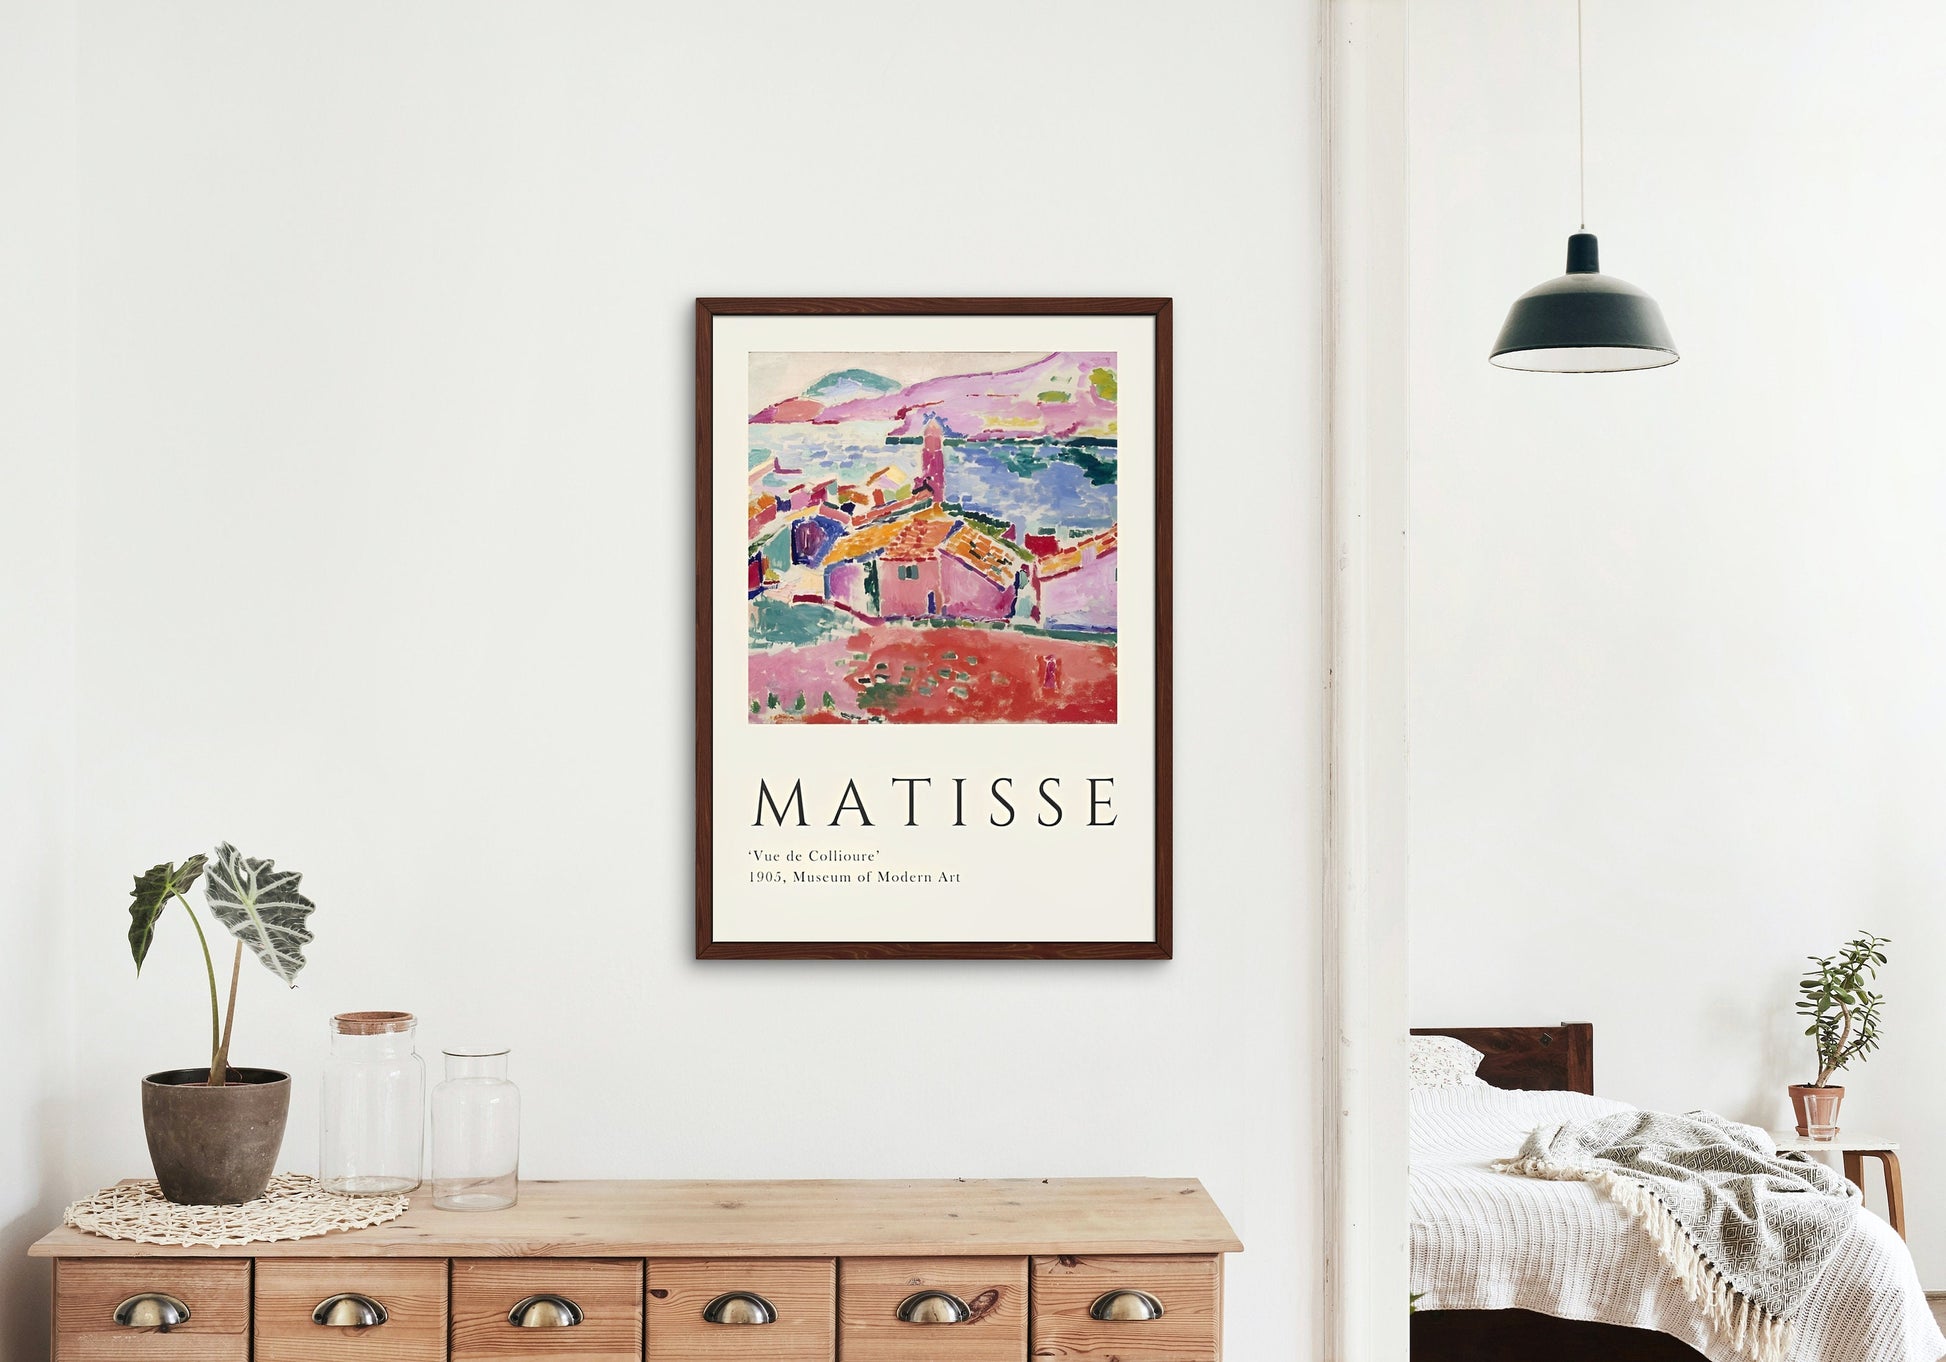 Gallery Wall Exhibition Poster Set of 8 DIGITAL DOWNLOAD, Gallery mix set, pastel pink wall art, Funky wall art, Matisse Print, New Yorker